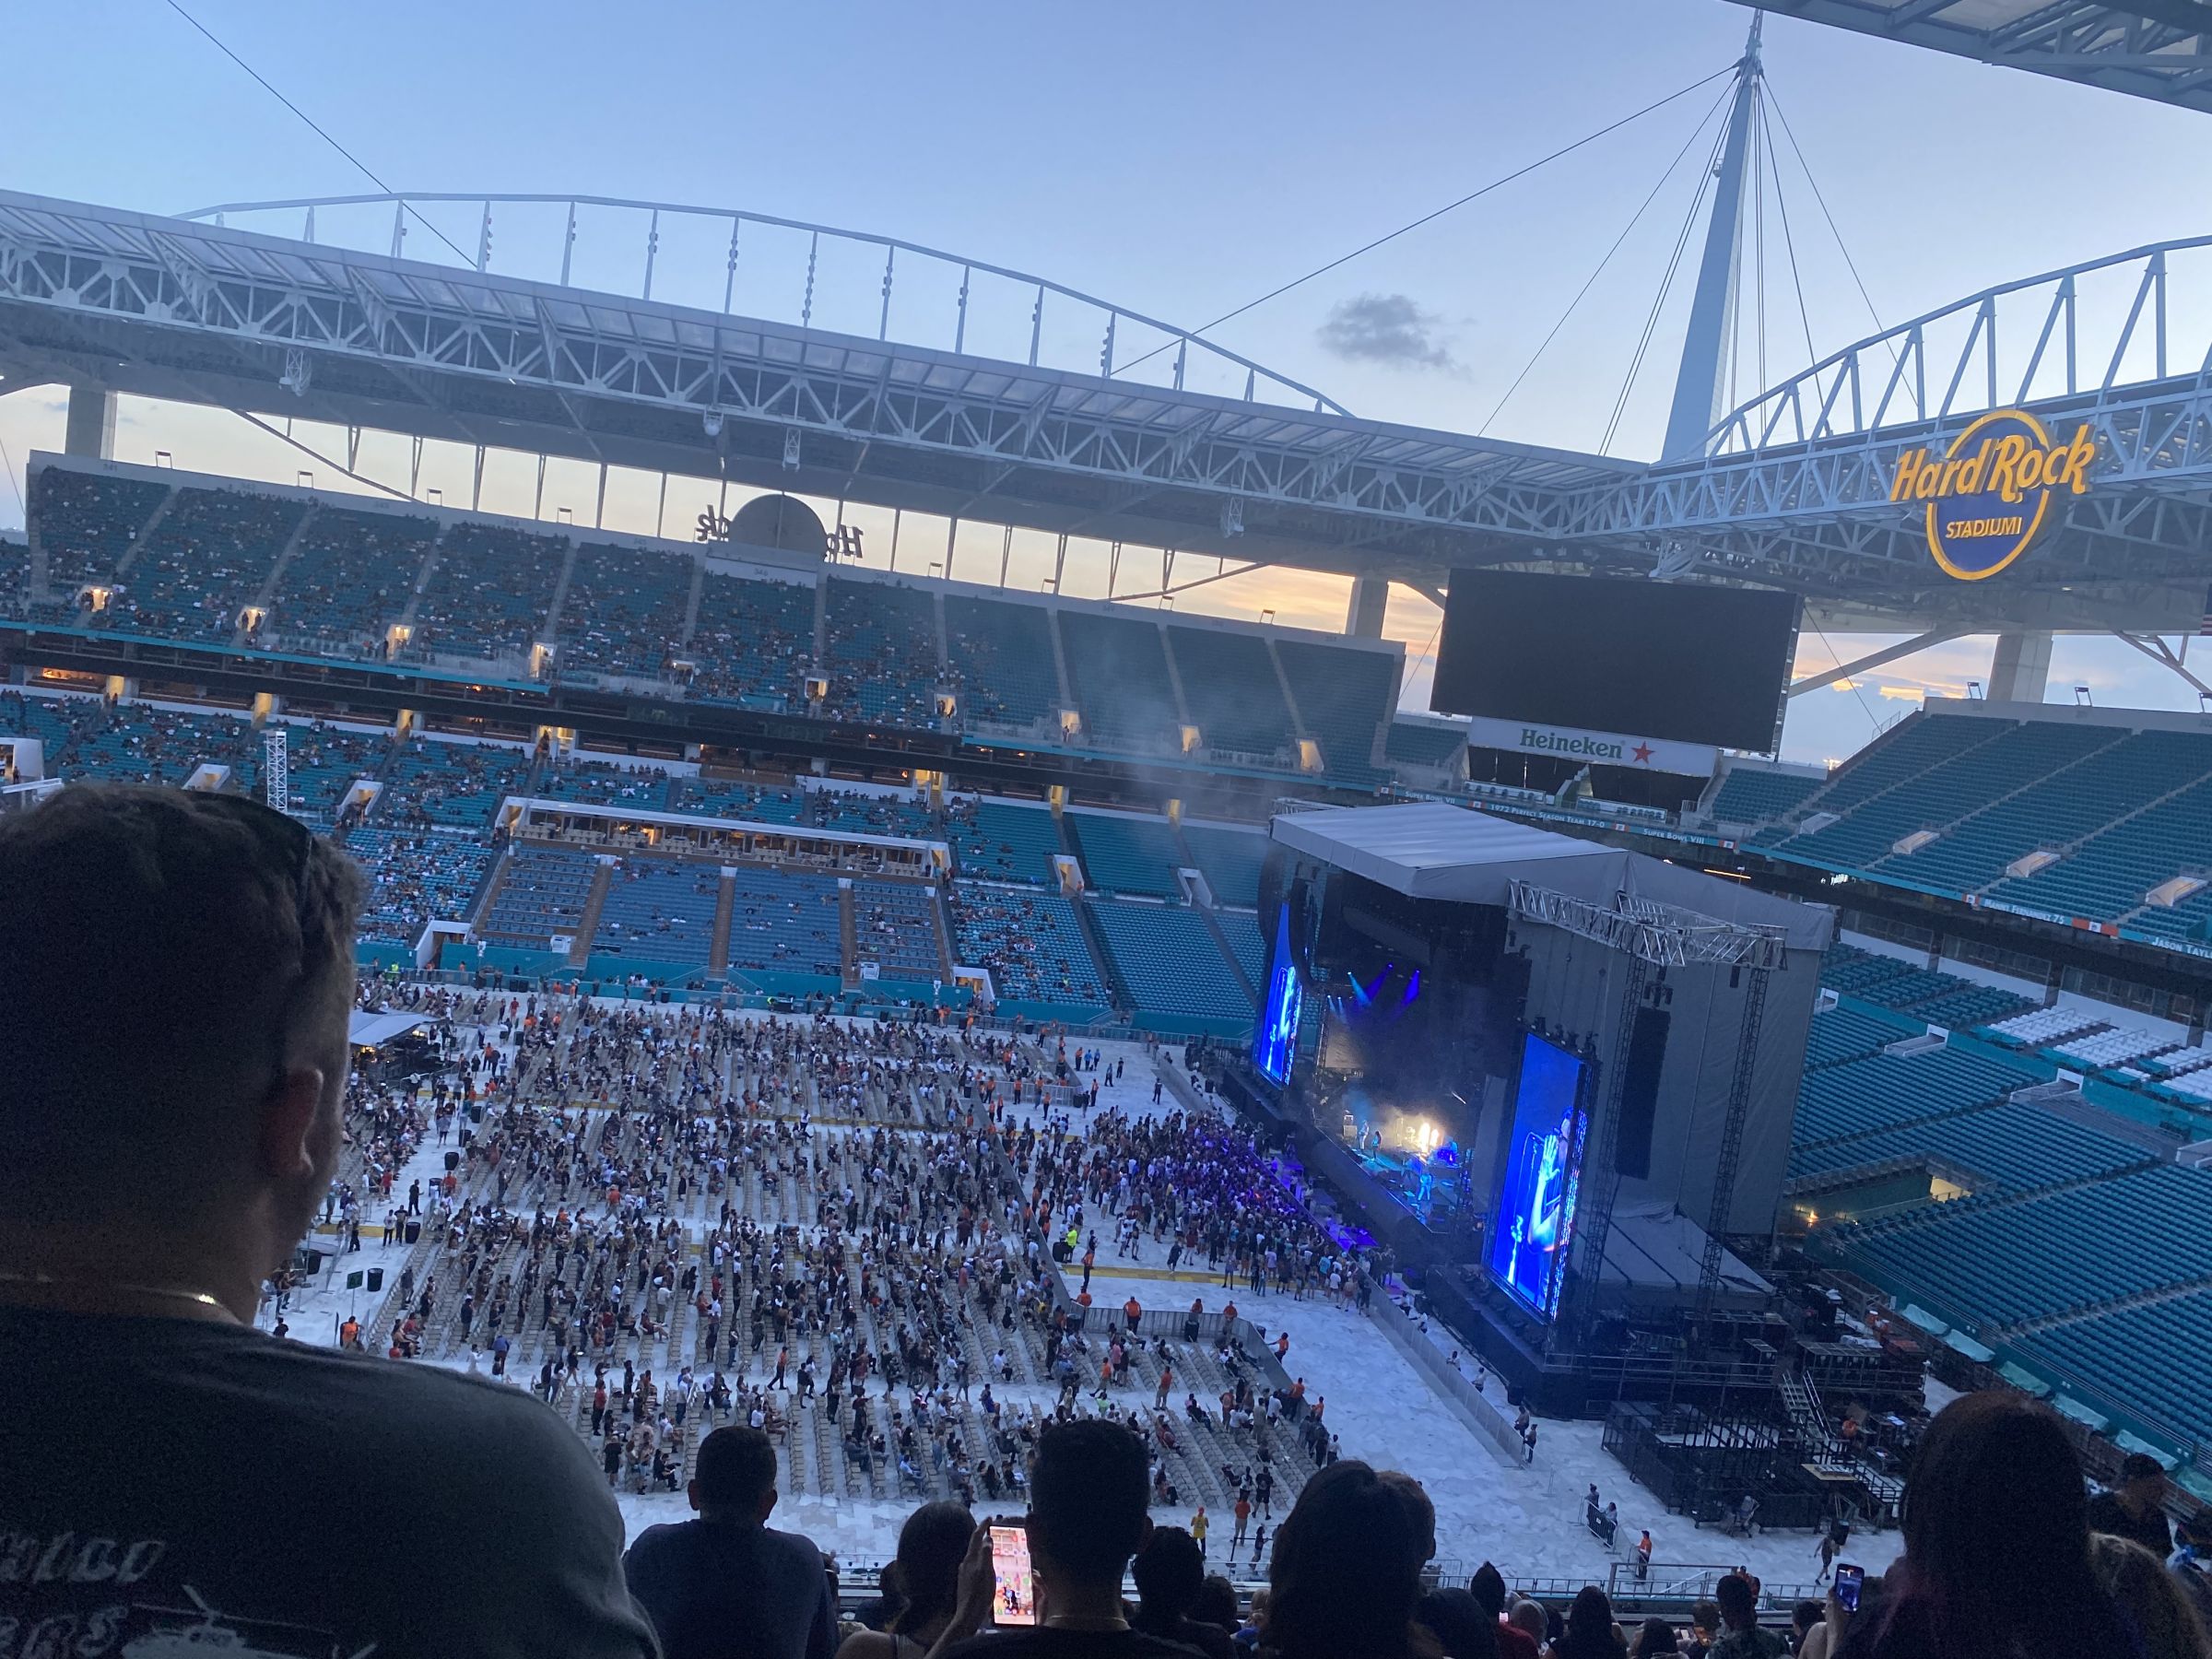 section 318, row 17 seat view  for concert - hard rock stadium